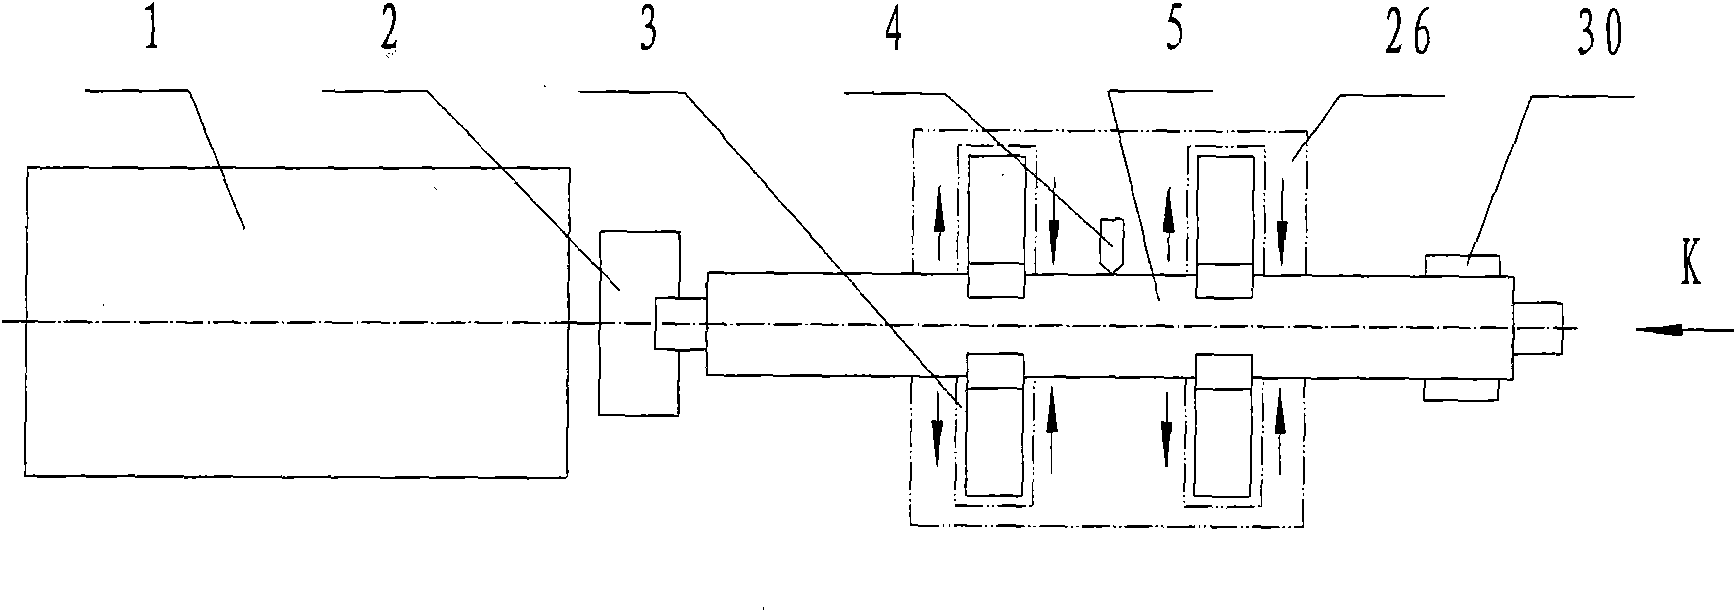 Workpiece positioning and clamping device for thread cutting machine